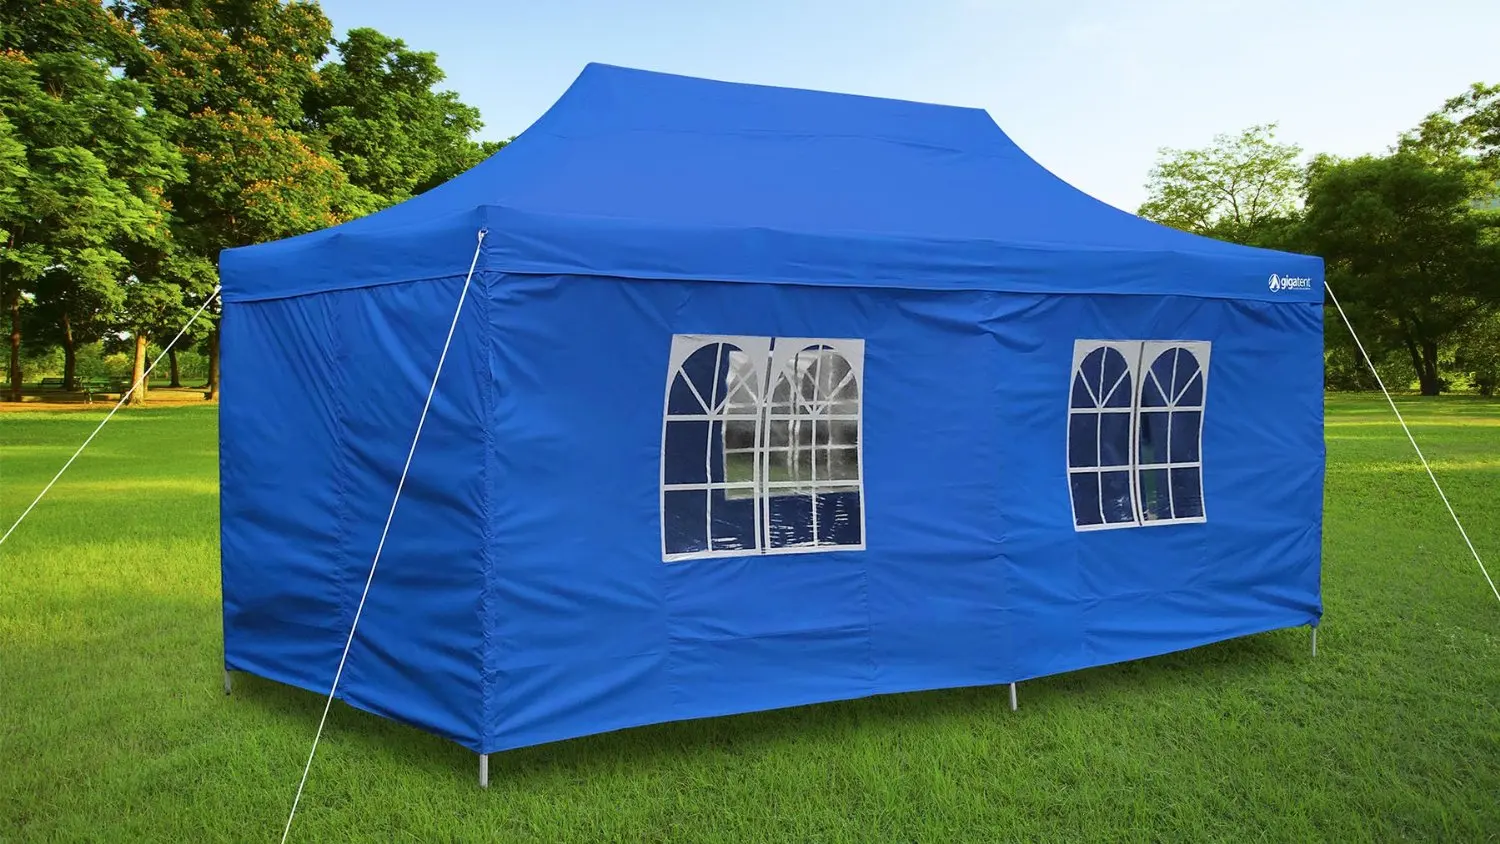 Buy GigaTent The Party Tent Deluxe 10 x 20 Canopy, Blue in Cheap Price ...